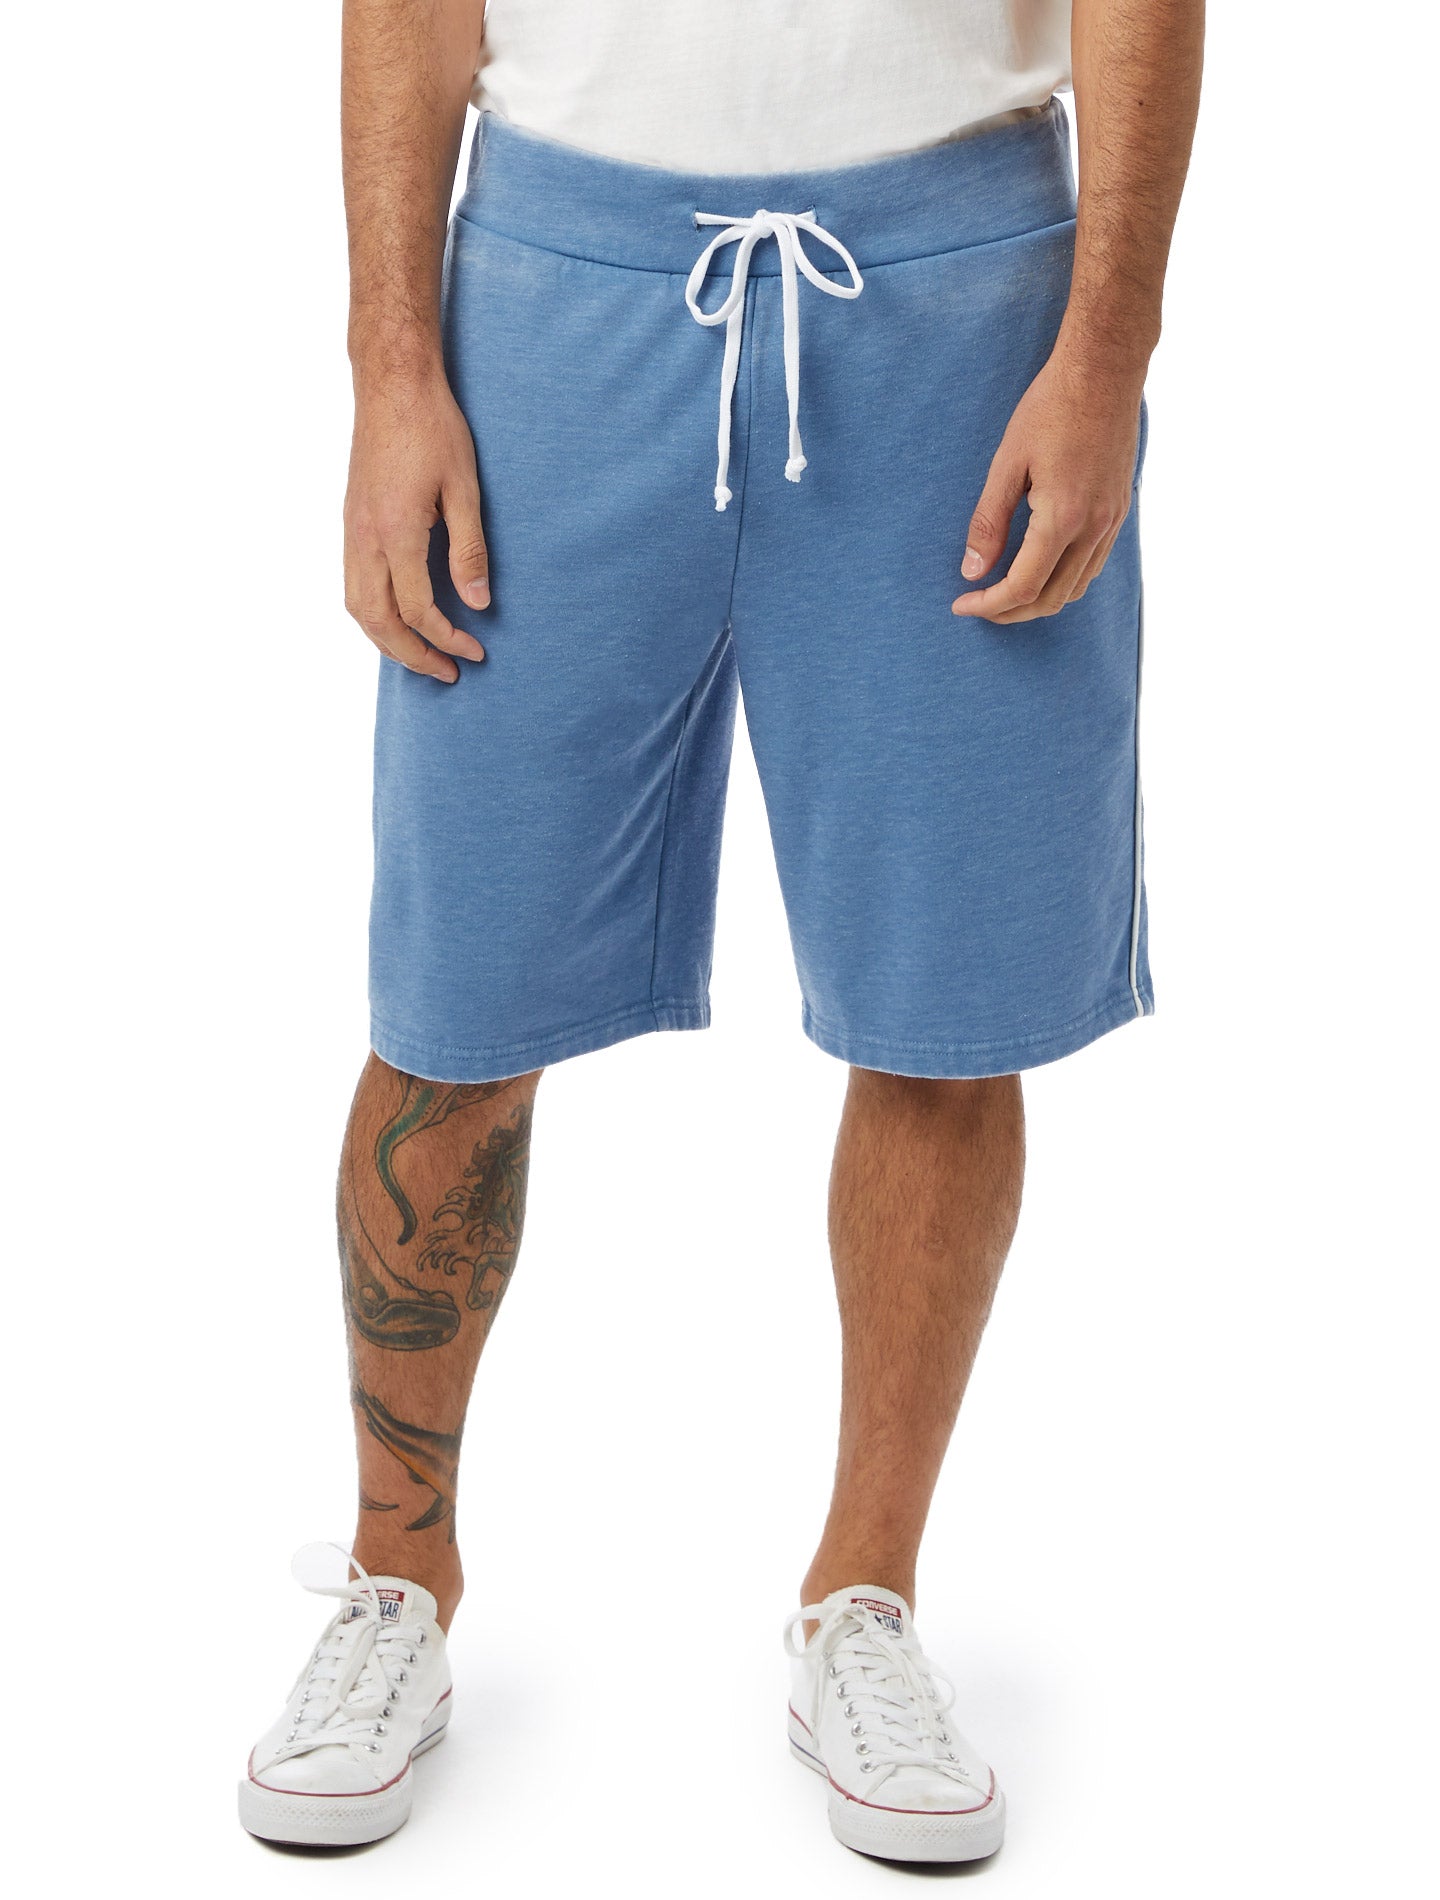 The Throwback French Terry Shorts